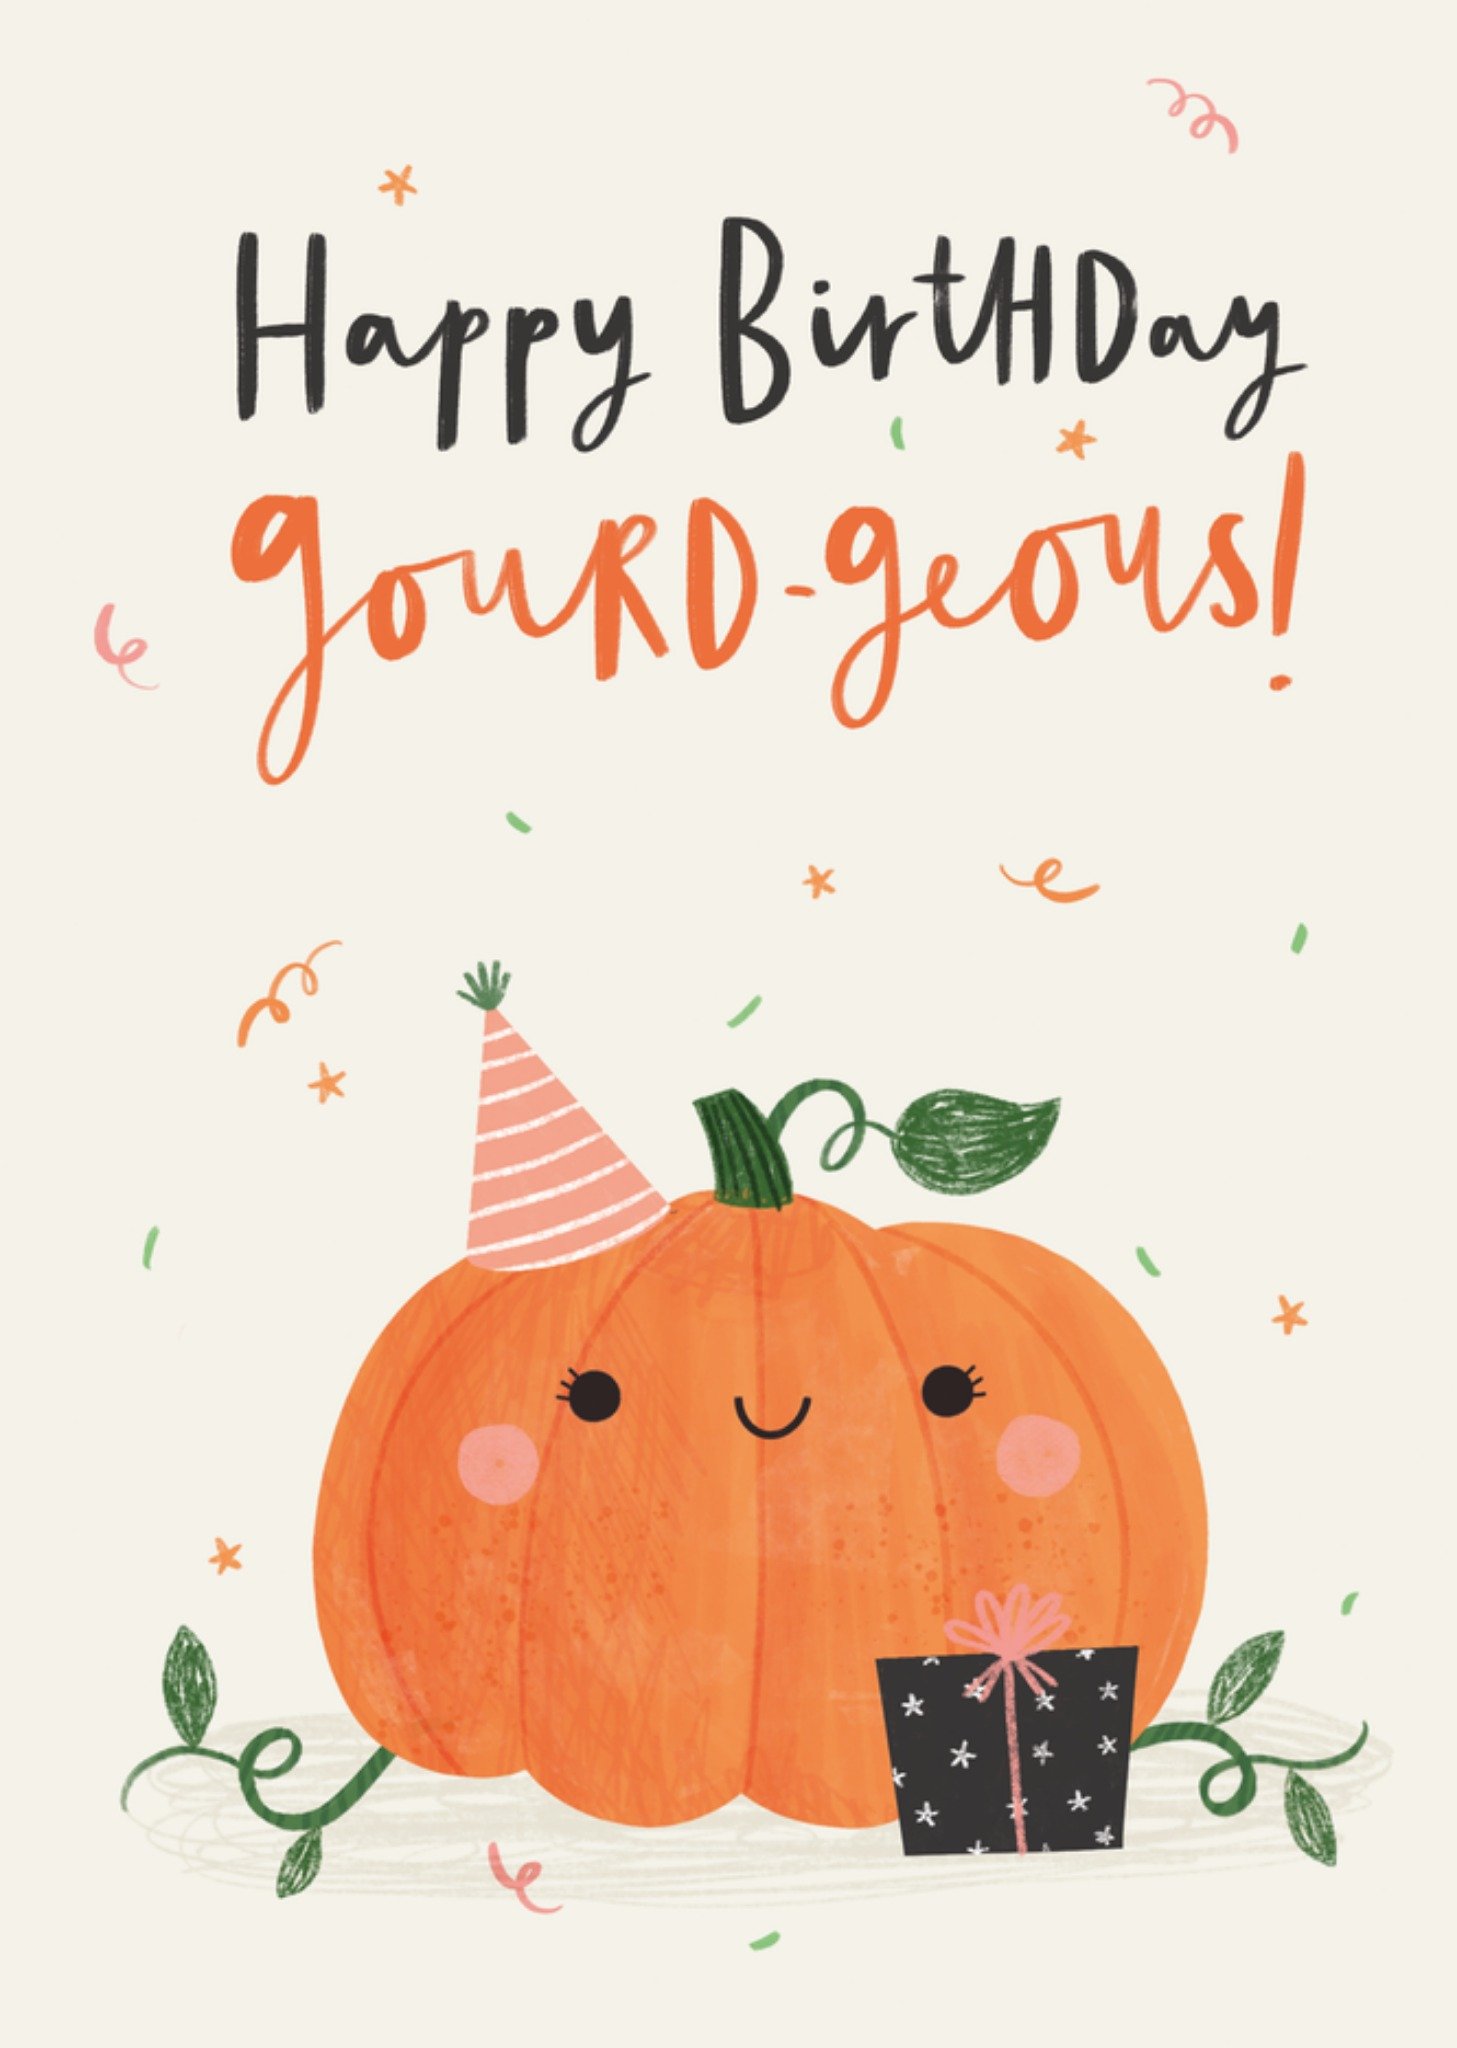 Moonpig Happy Birthday Gourd-Geous Card, Large